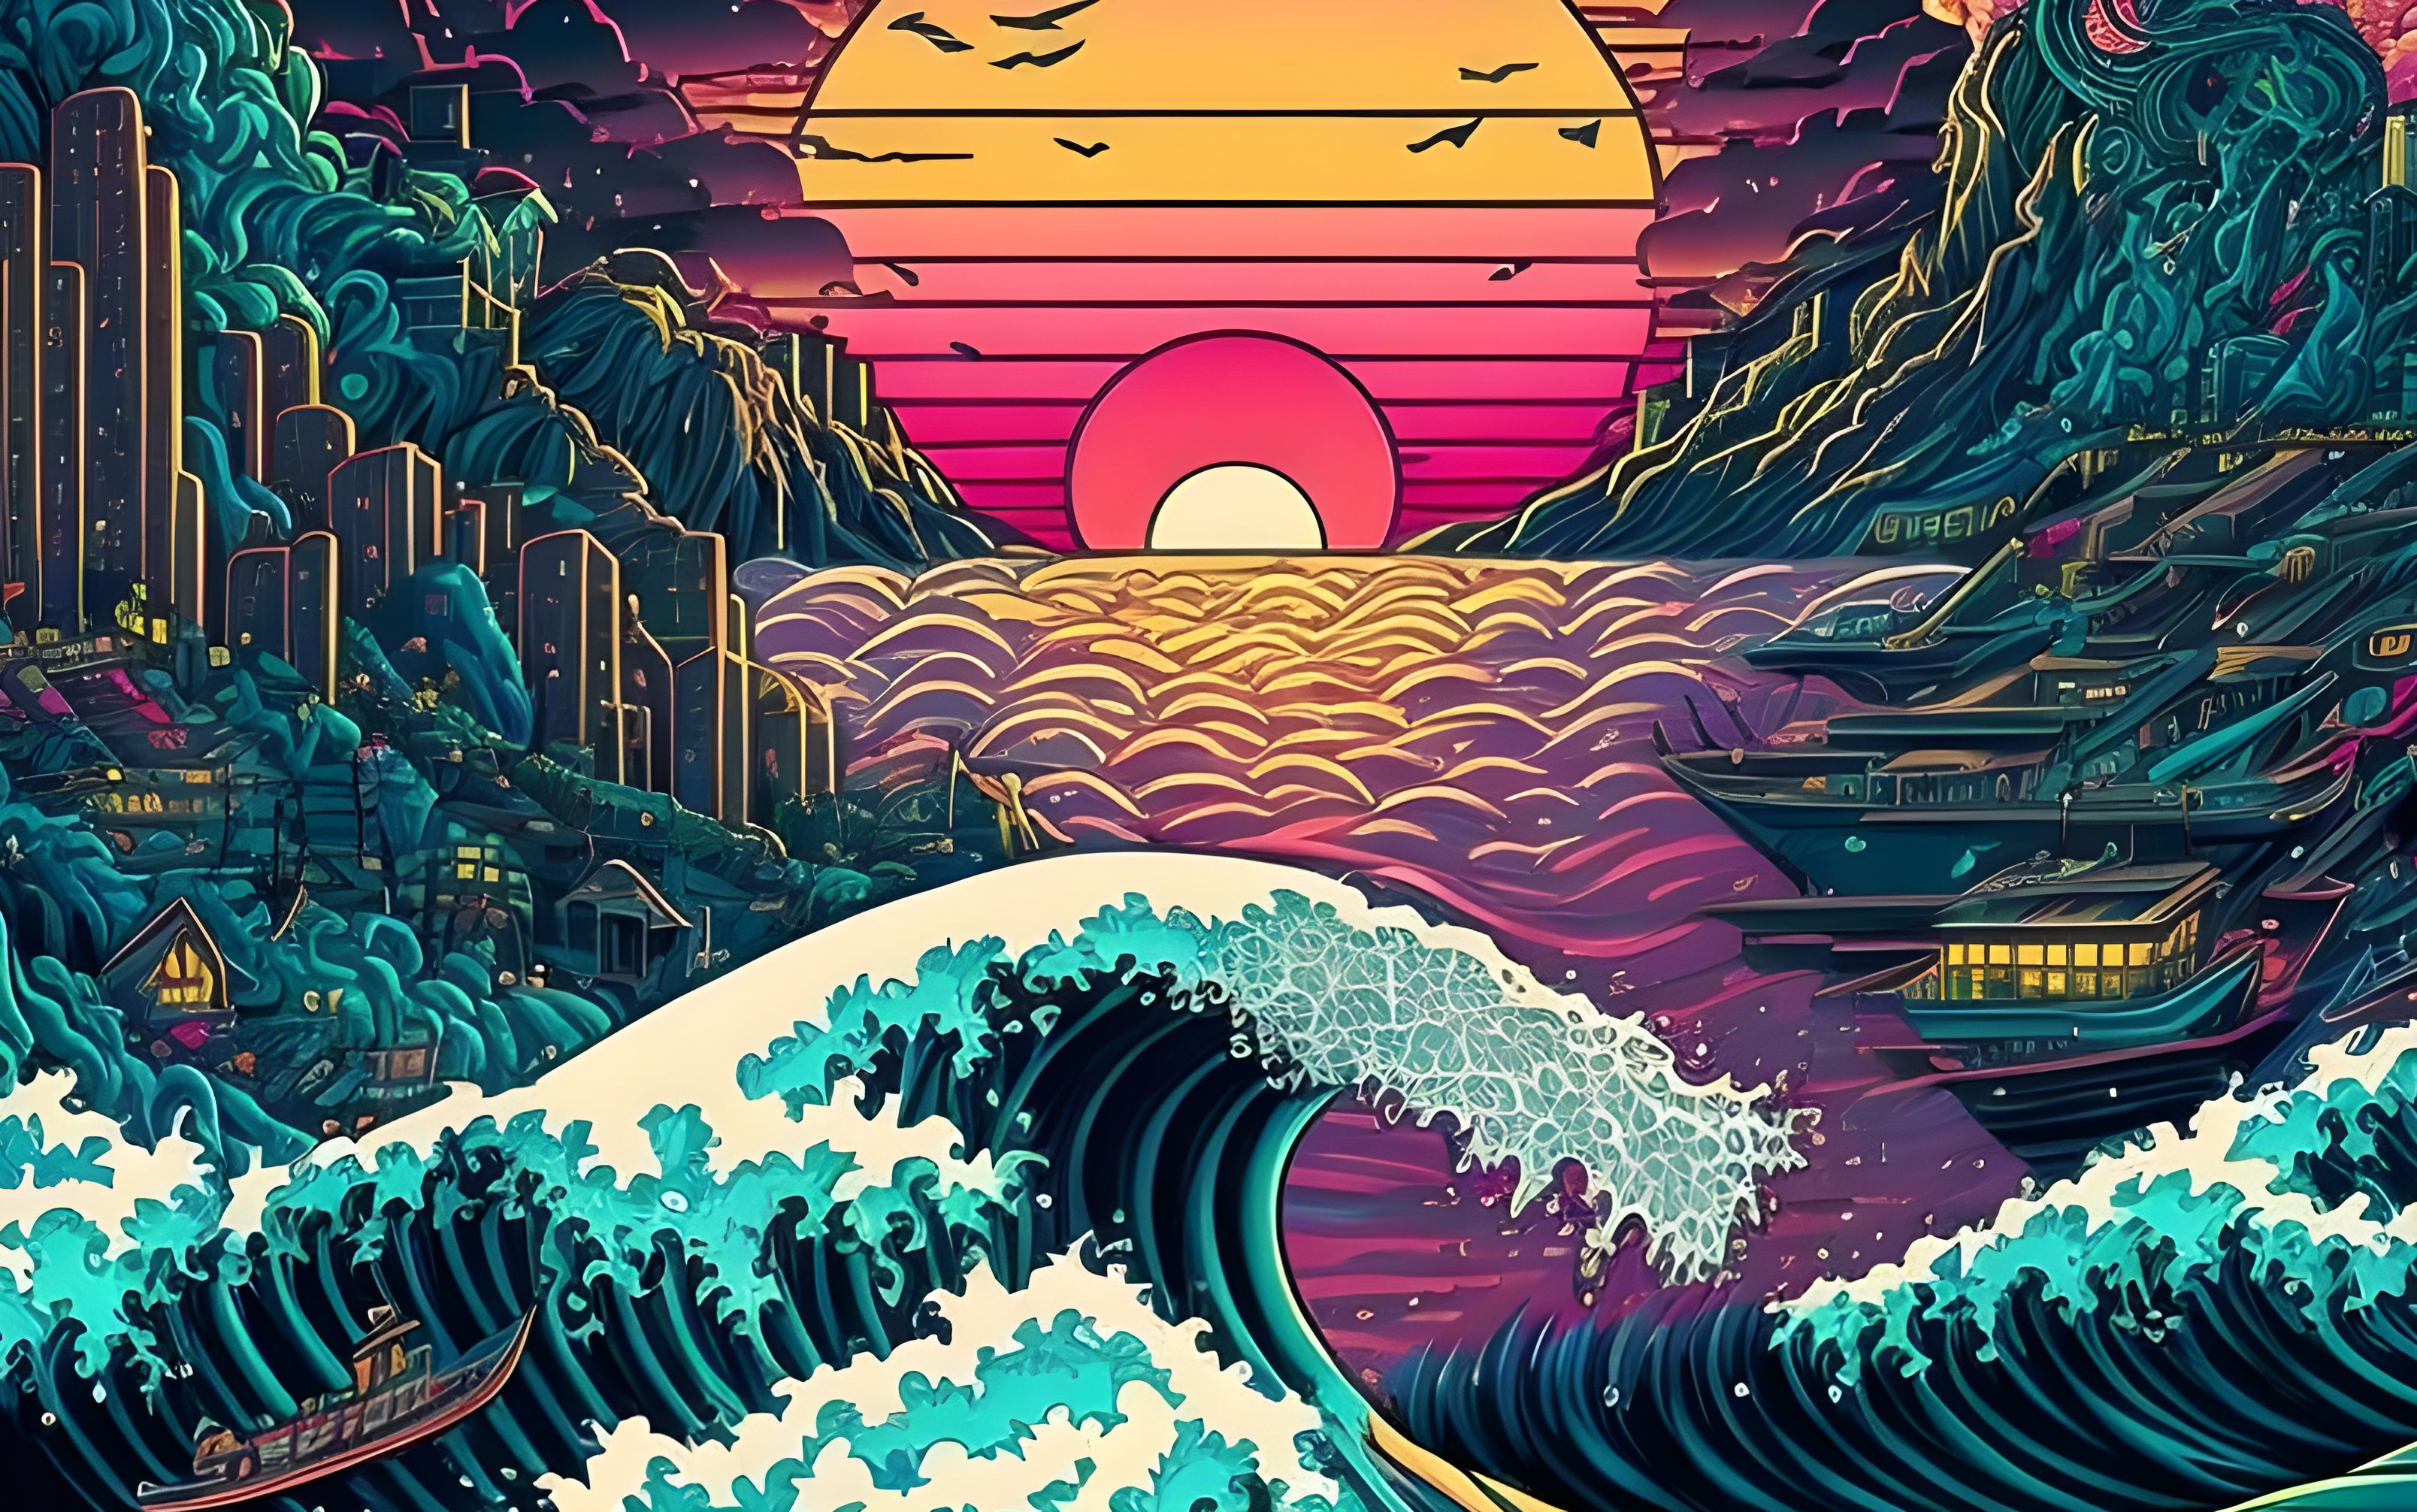 A colorful illustration of a sunset over a city by the sea - The Great Wave off Kanagawa